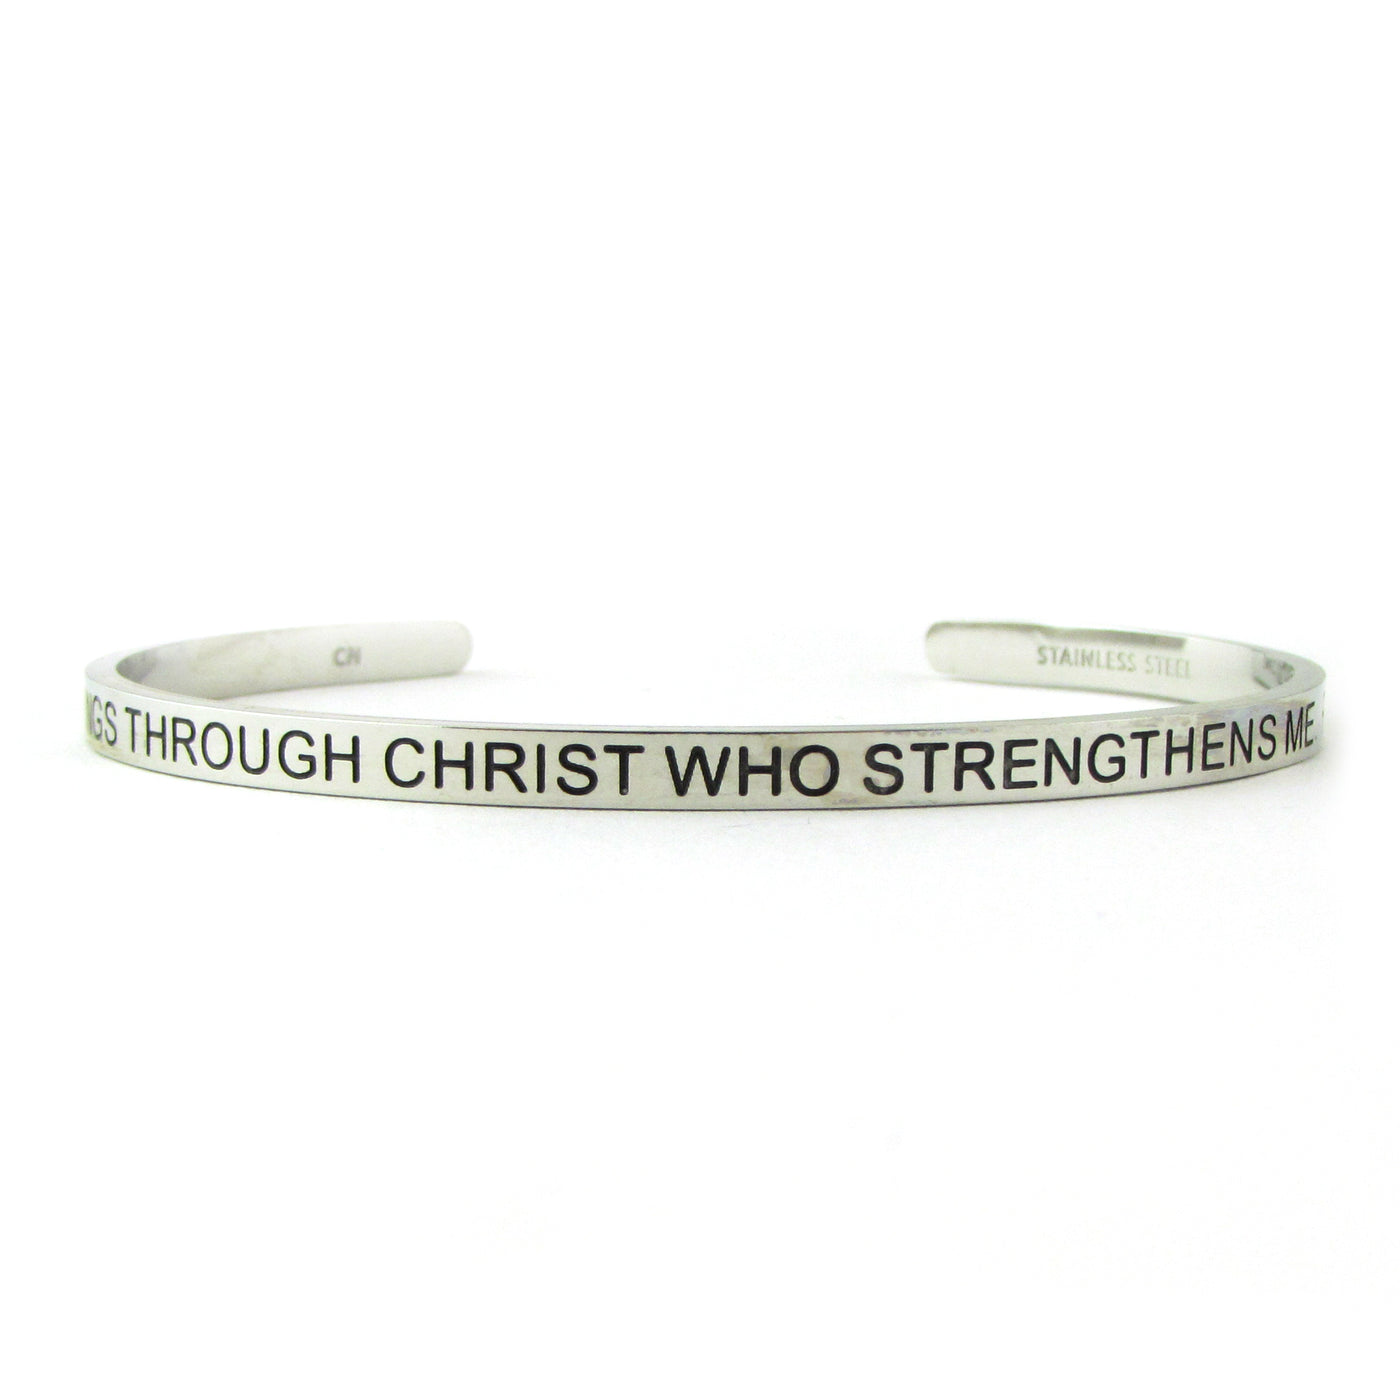 Philippians 4:13 Blessing Bands-Good Work(s) Make A Difference® | Christian and Inspirational Jewelry Company in Vernon, California